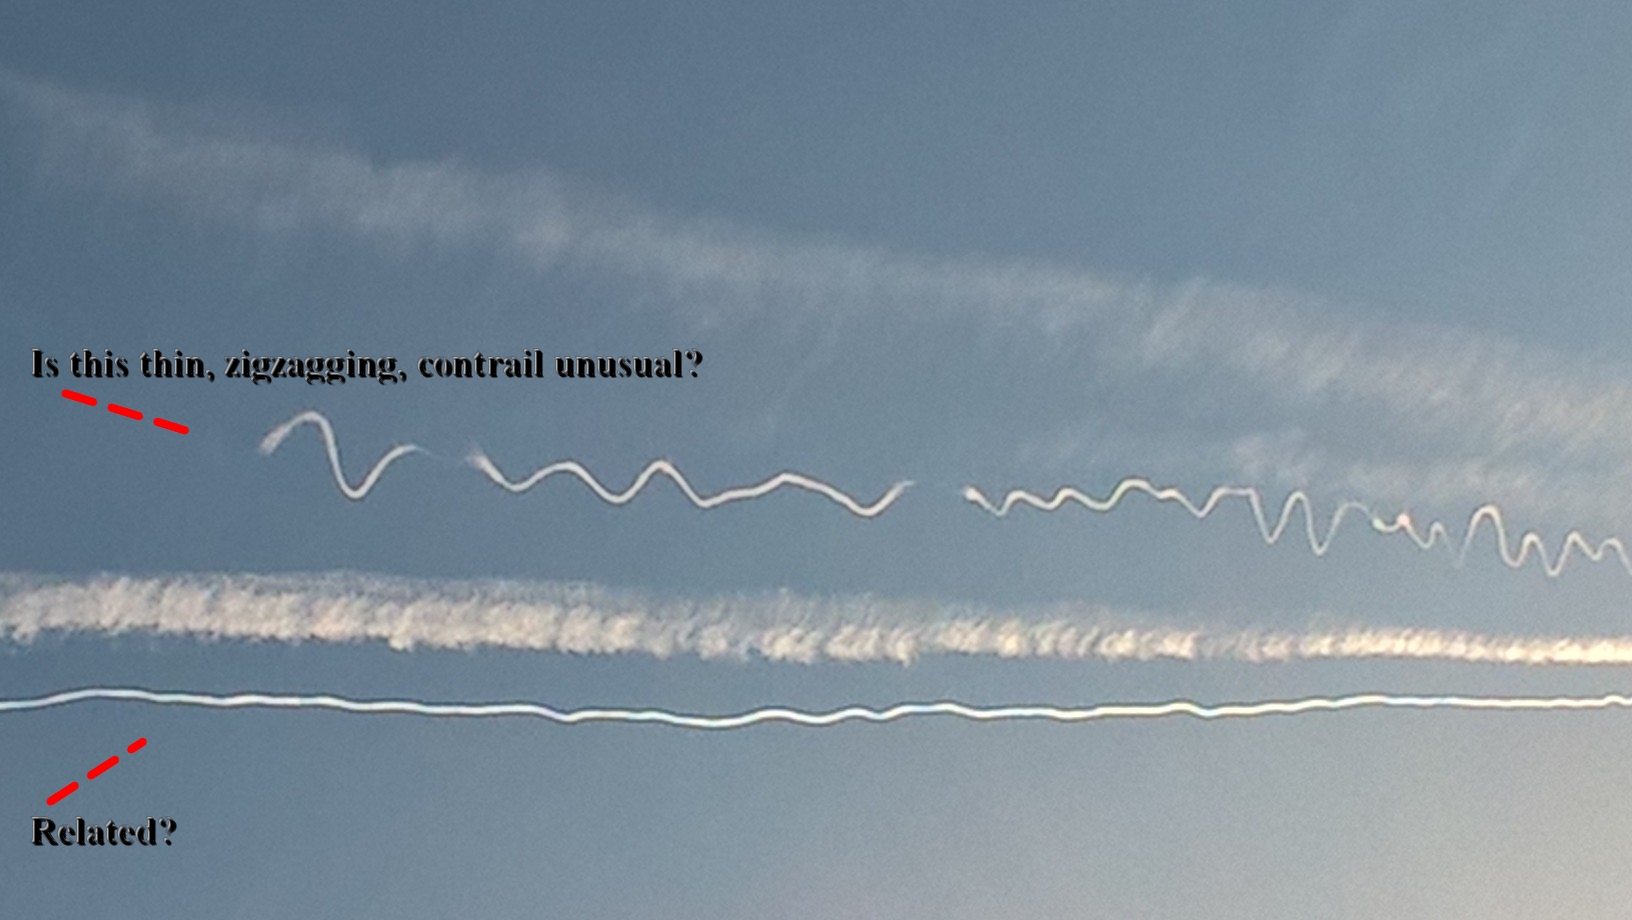 The strangest contrails/chemtrails ever - or UFO trail?